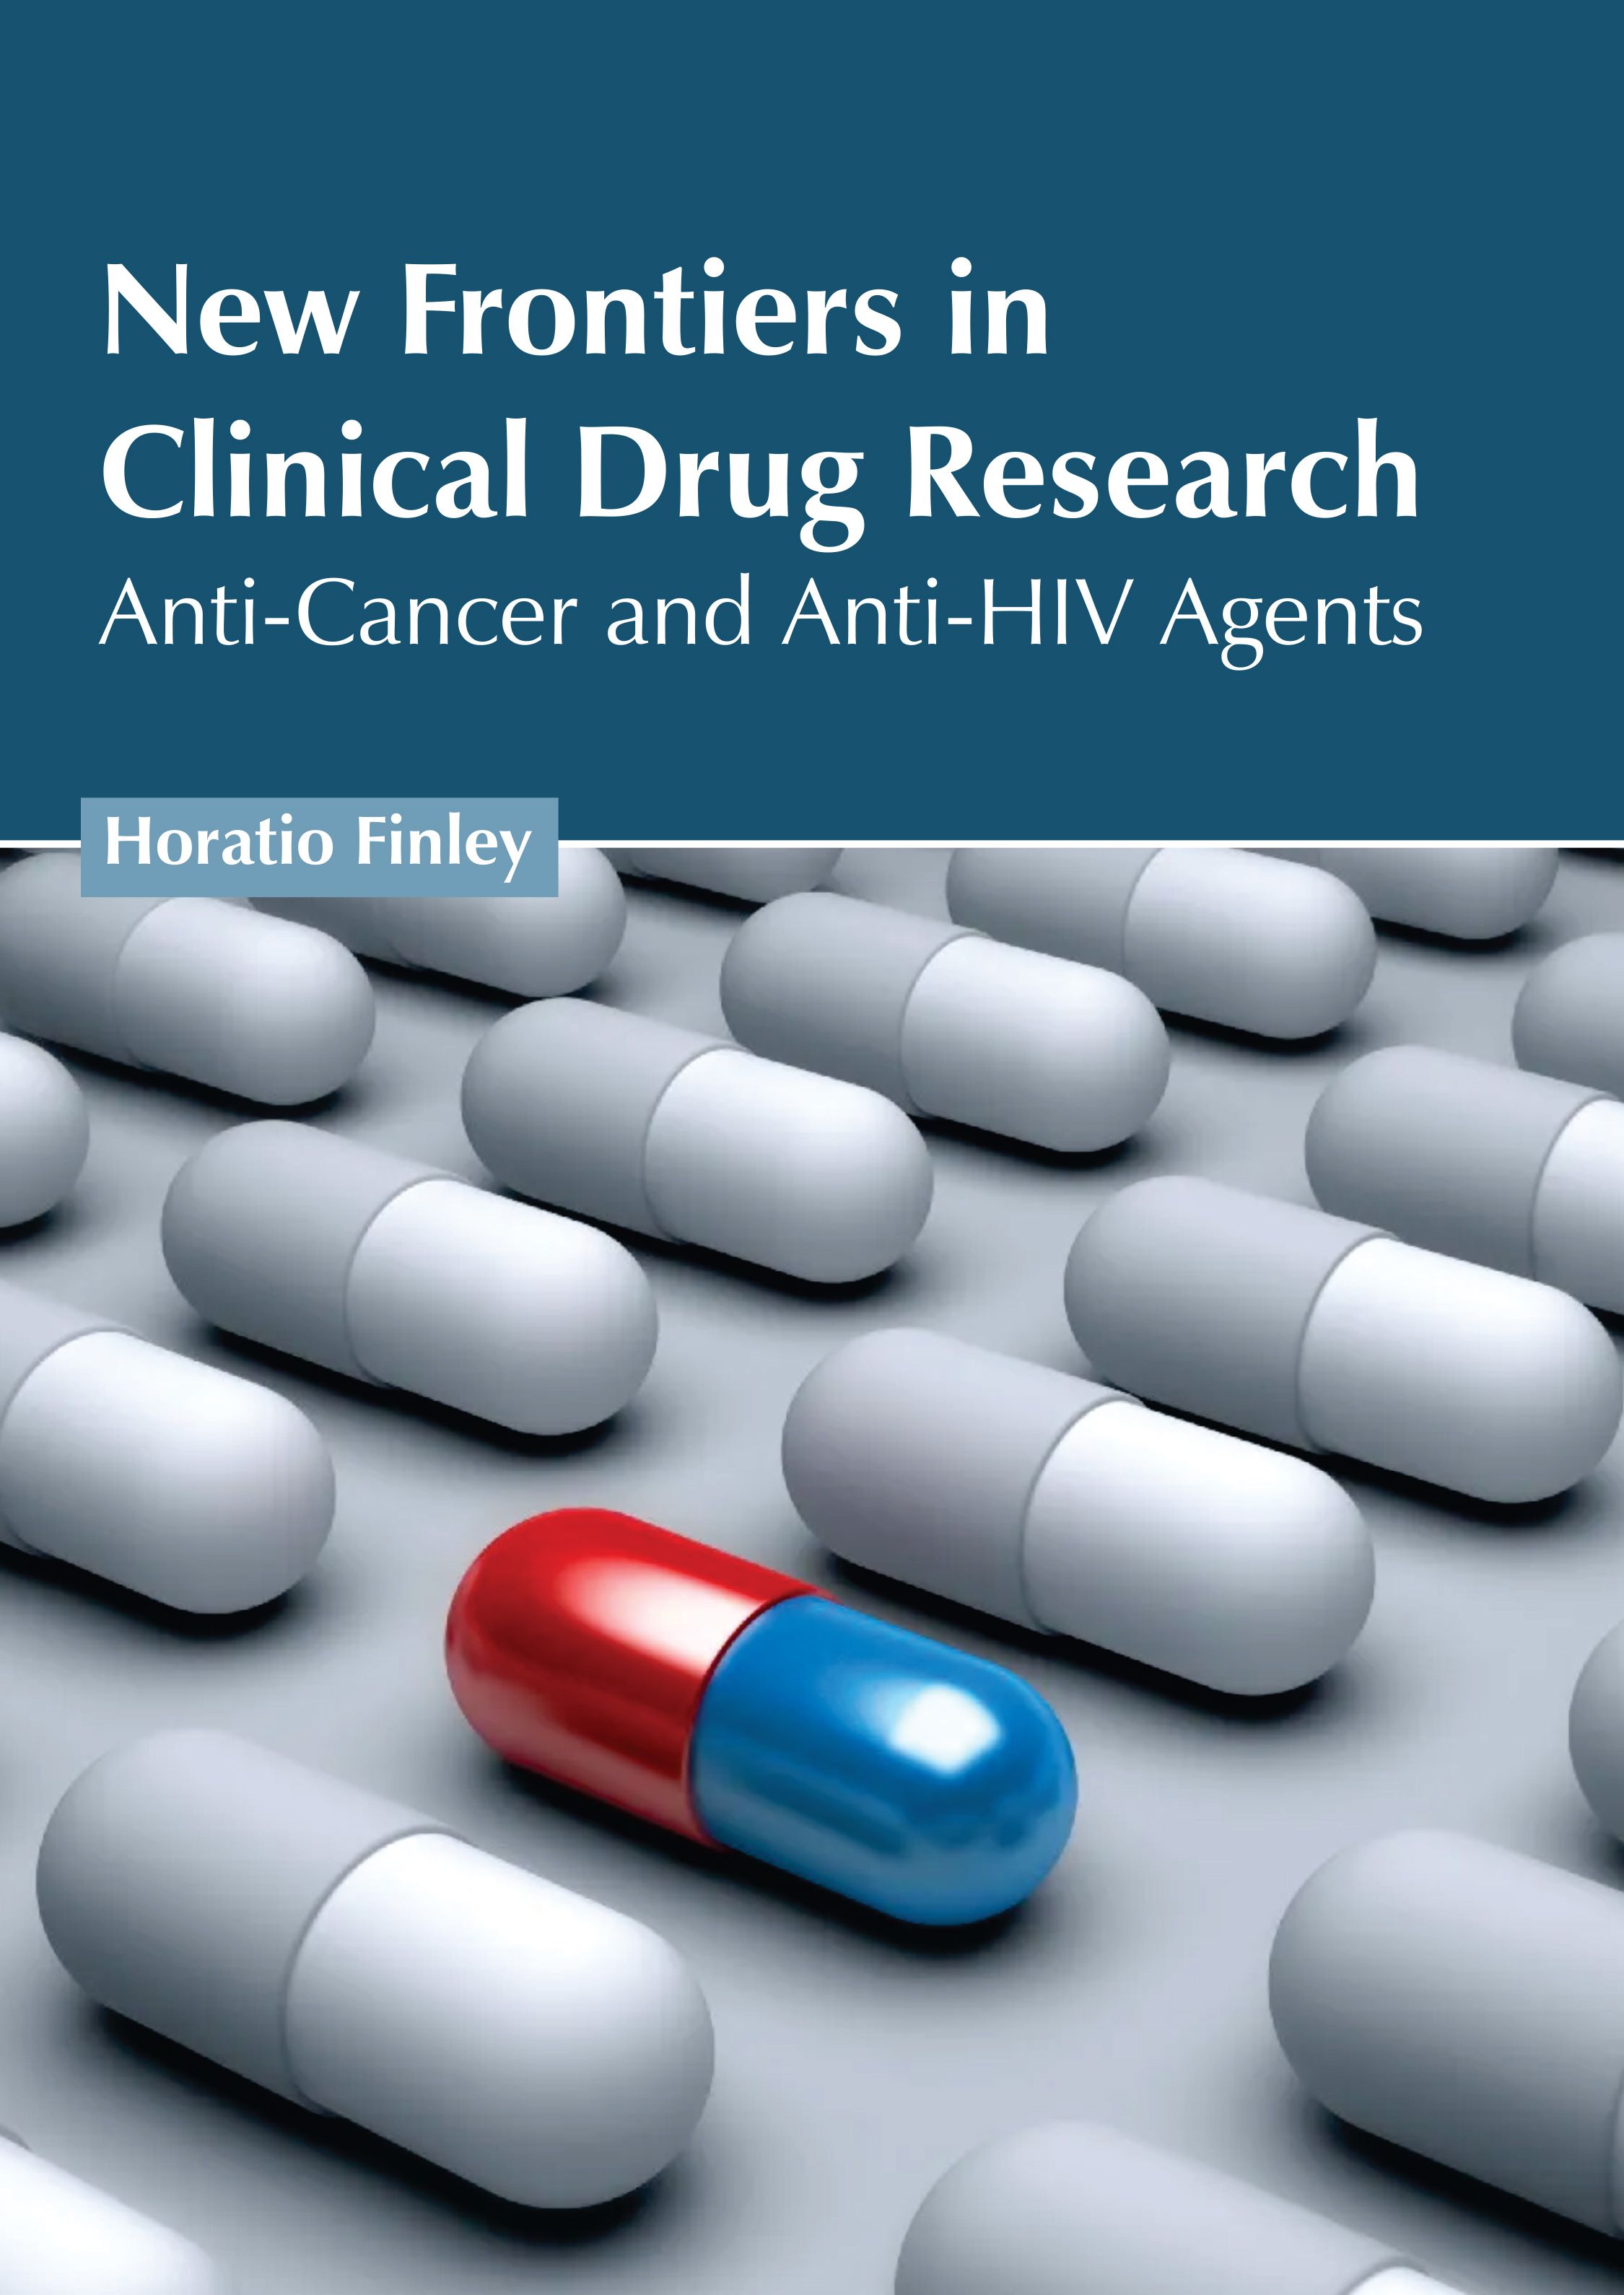 NEW FRONTIERS IN CLINICAL DRUG RESEARCH: ANTI-CANCER AND ANTI-HIV AGENTS